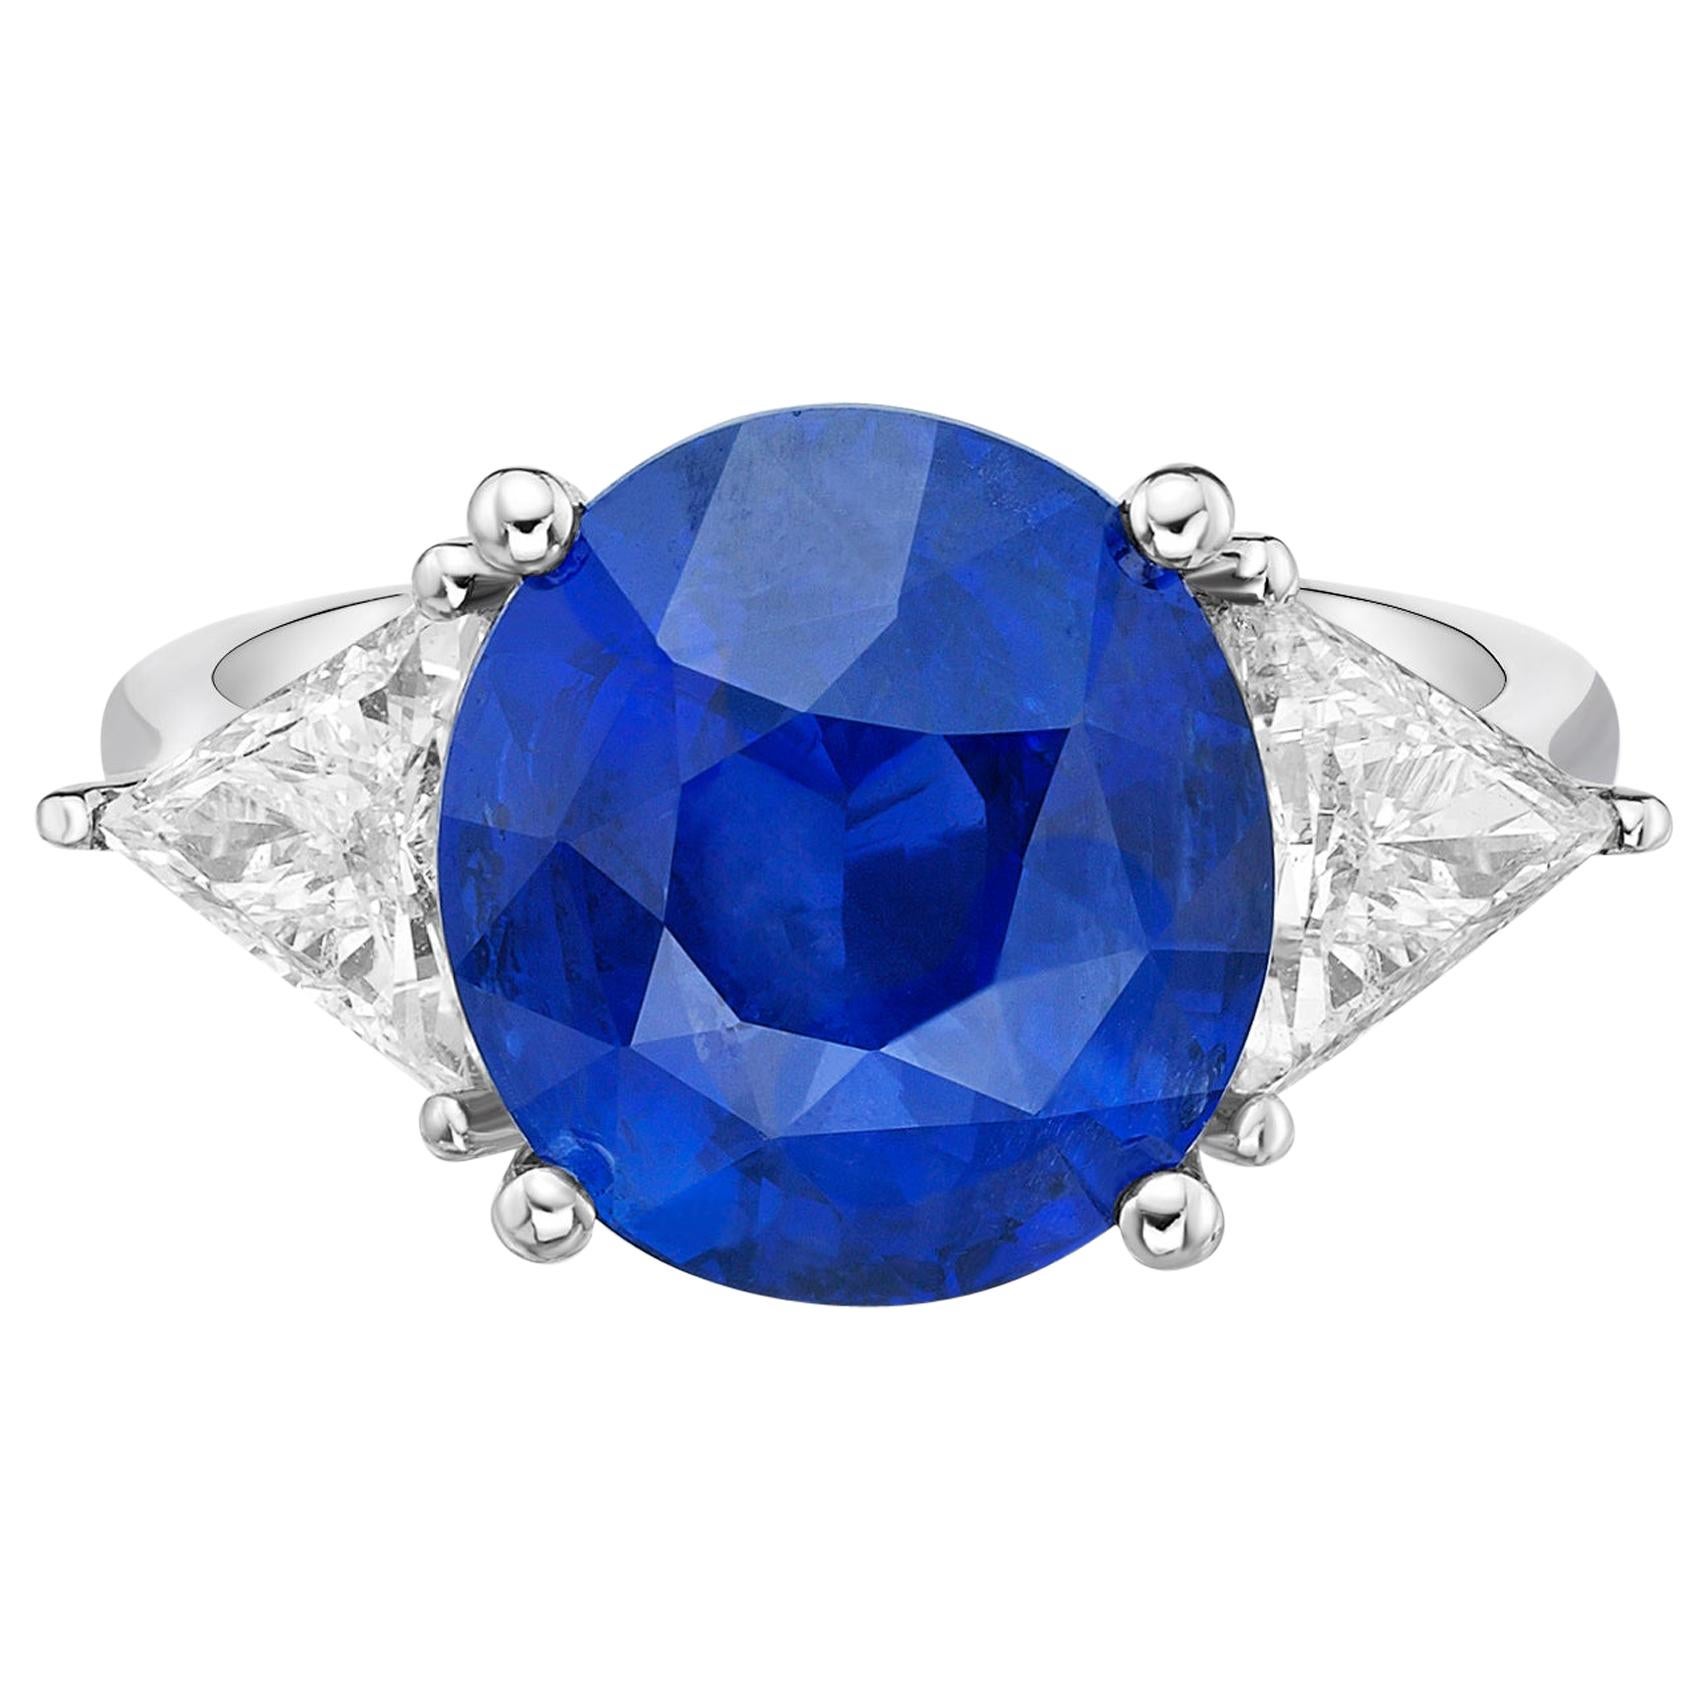 7.05 Carat Royal Blue Sapphire GRS Certified Non Heated Diamond Ring Oval Cut